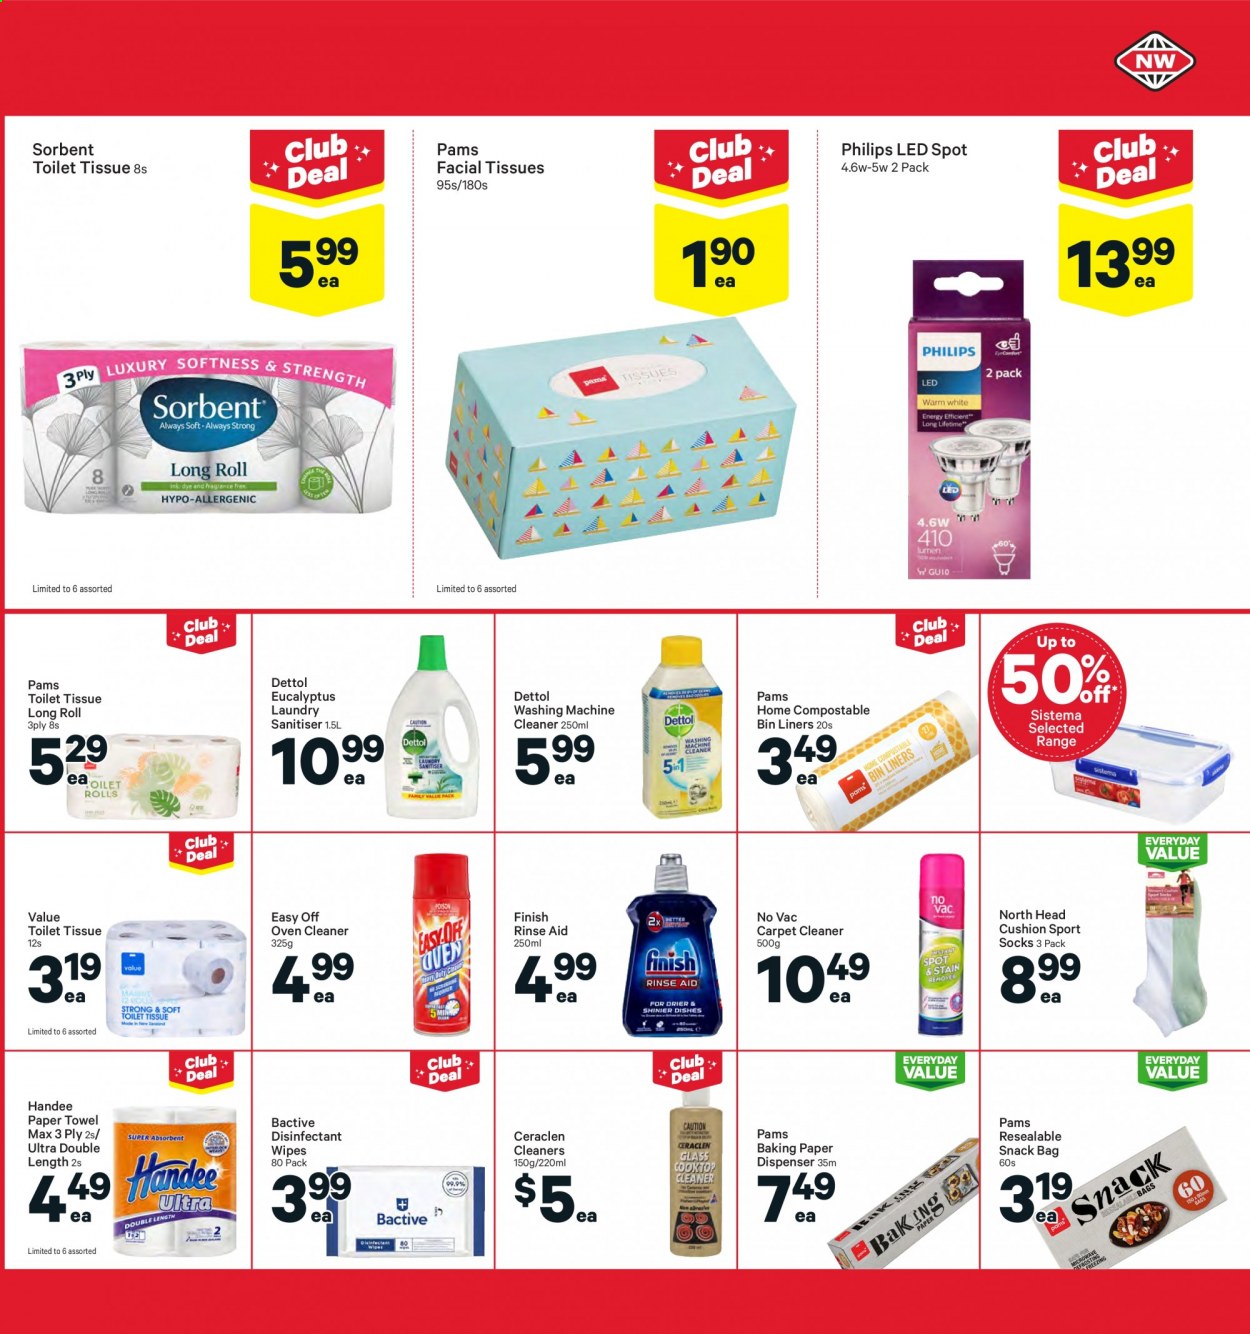 thumbnail - New World mailer - 30.08.2021 - 05.09.2021 - Sales products - wipes, Dettol, toilet paper, Handee, paper towels, facial tissues, desinfection. Page 33.